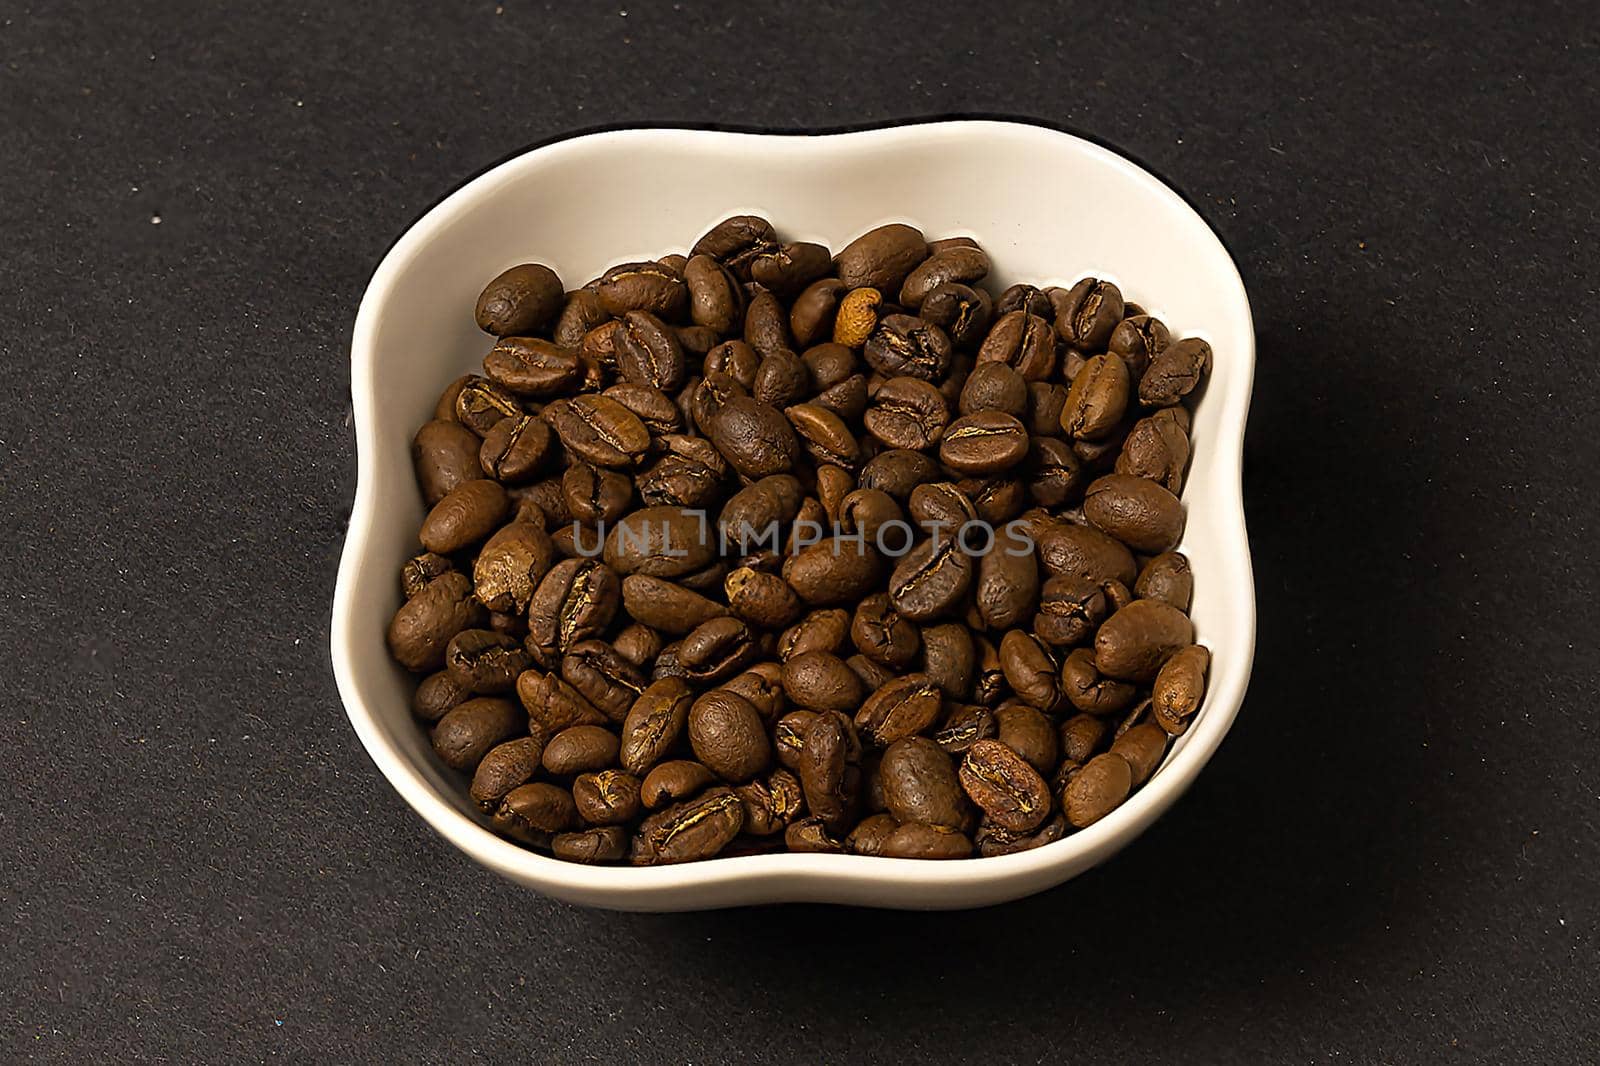 roasted coffee beans are poured into a white porcelain bowl and placed on a black background